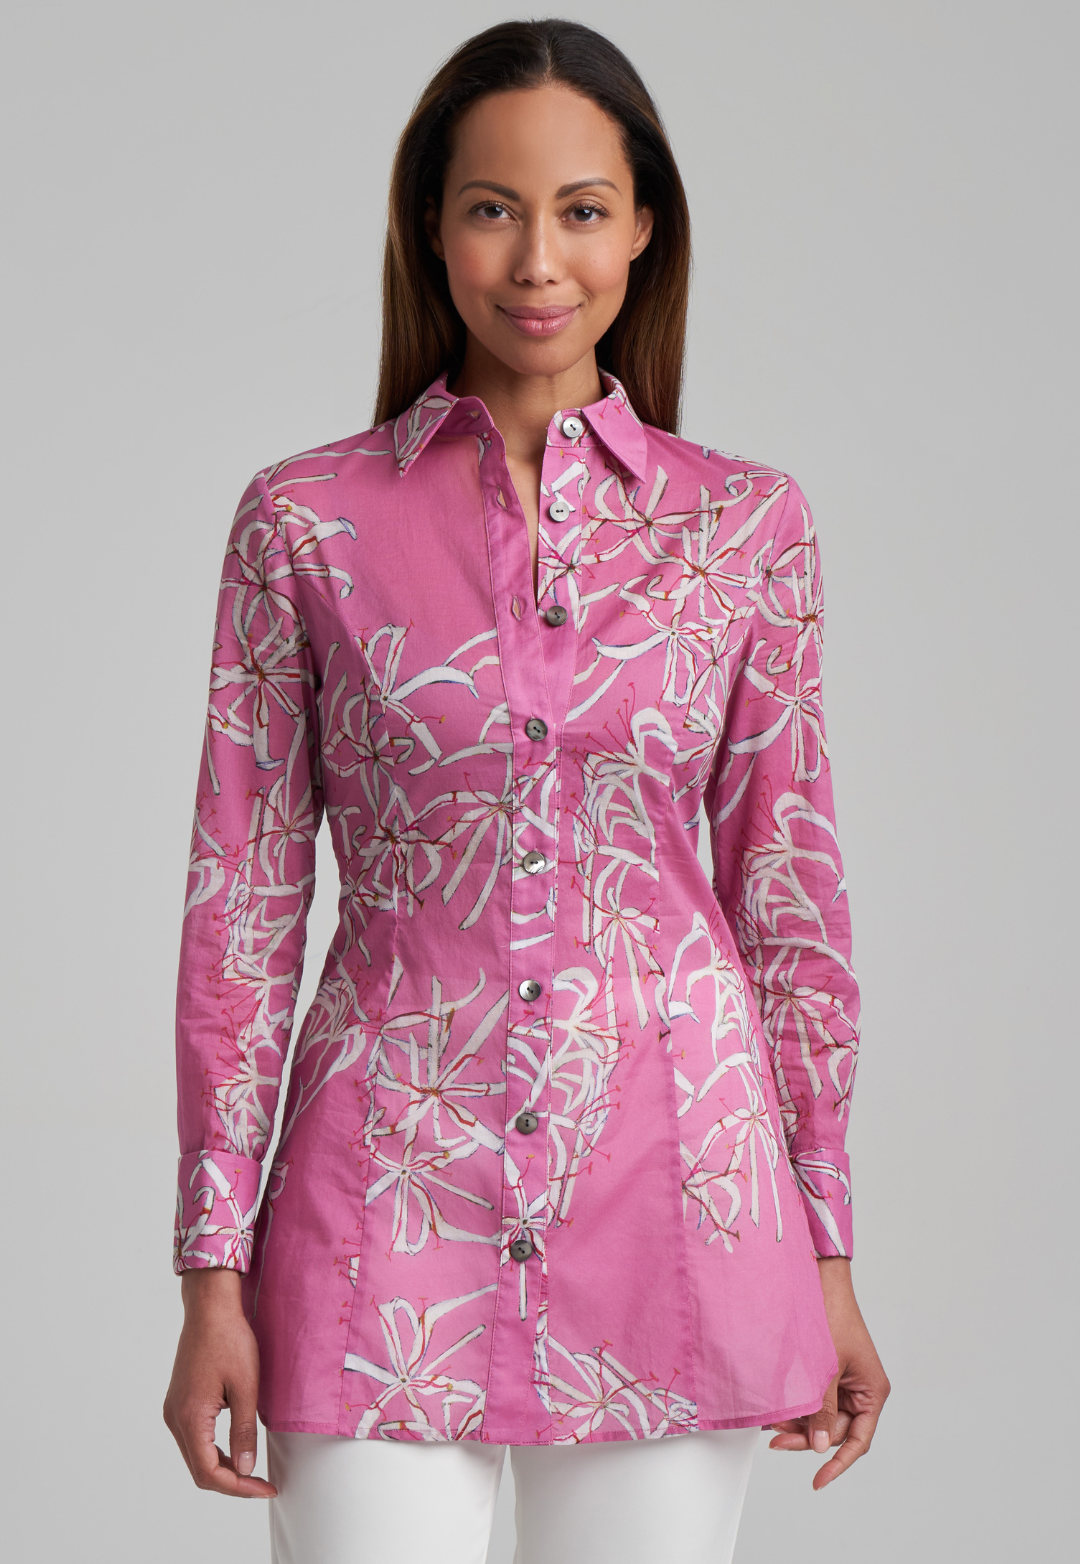 Woman wearing cotton shirt blouse in pink watermelon spider lily print by Ala von Auersperg for spring summer 2021